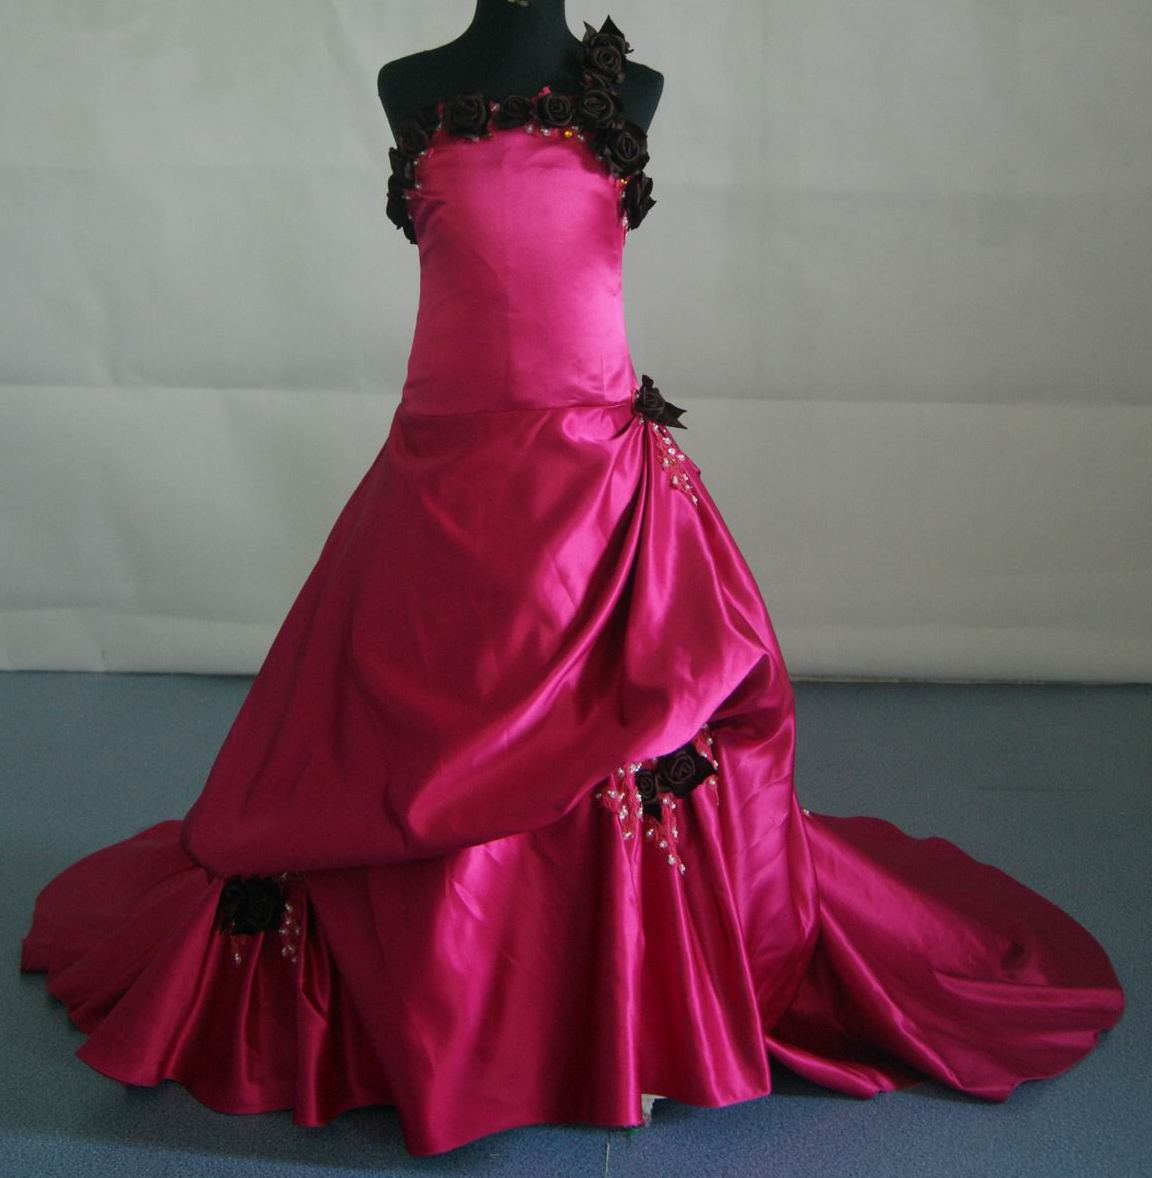 Bunches of roses gown